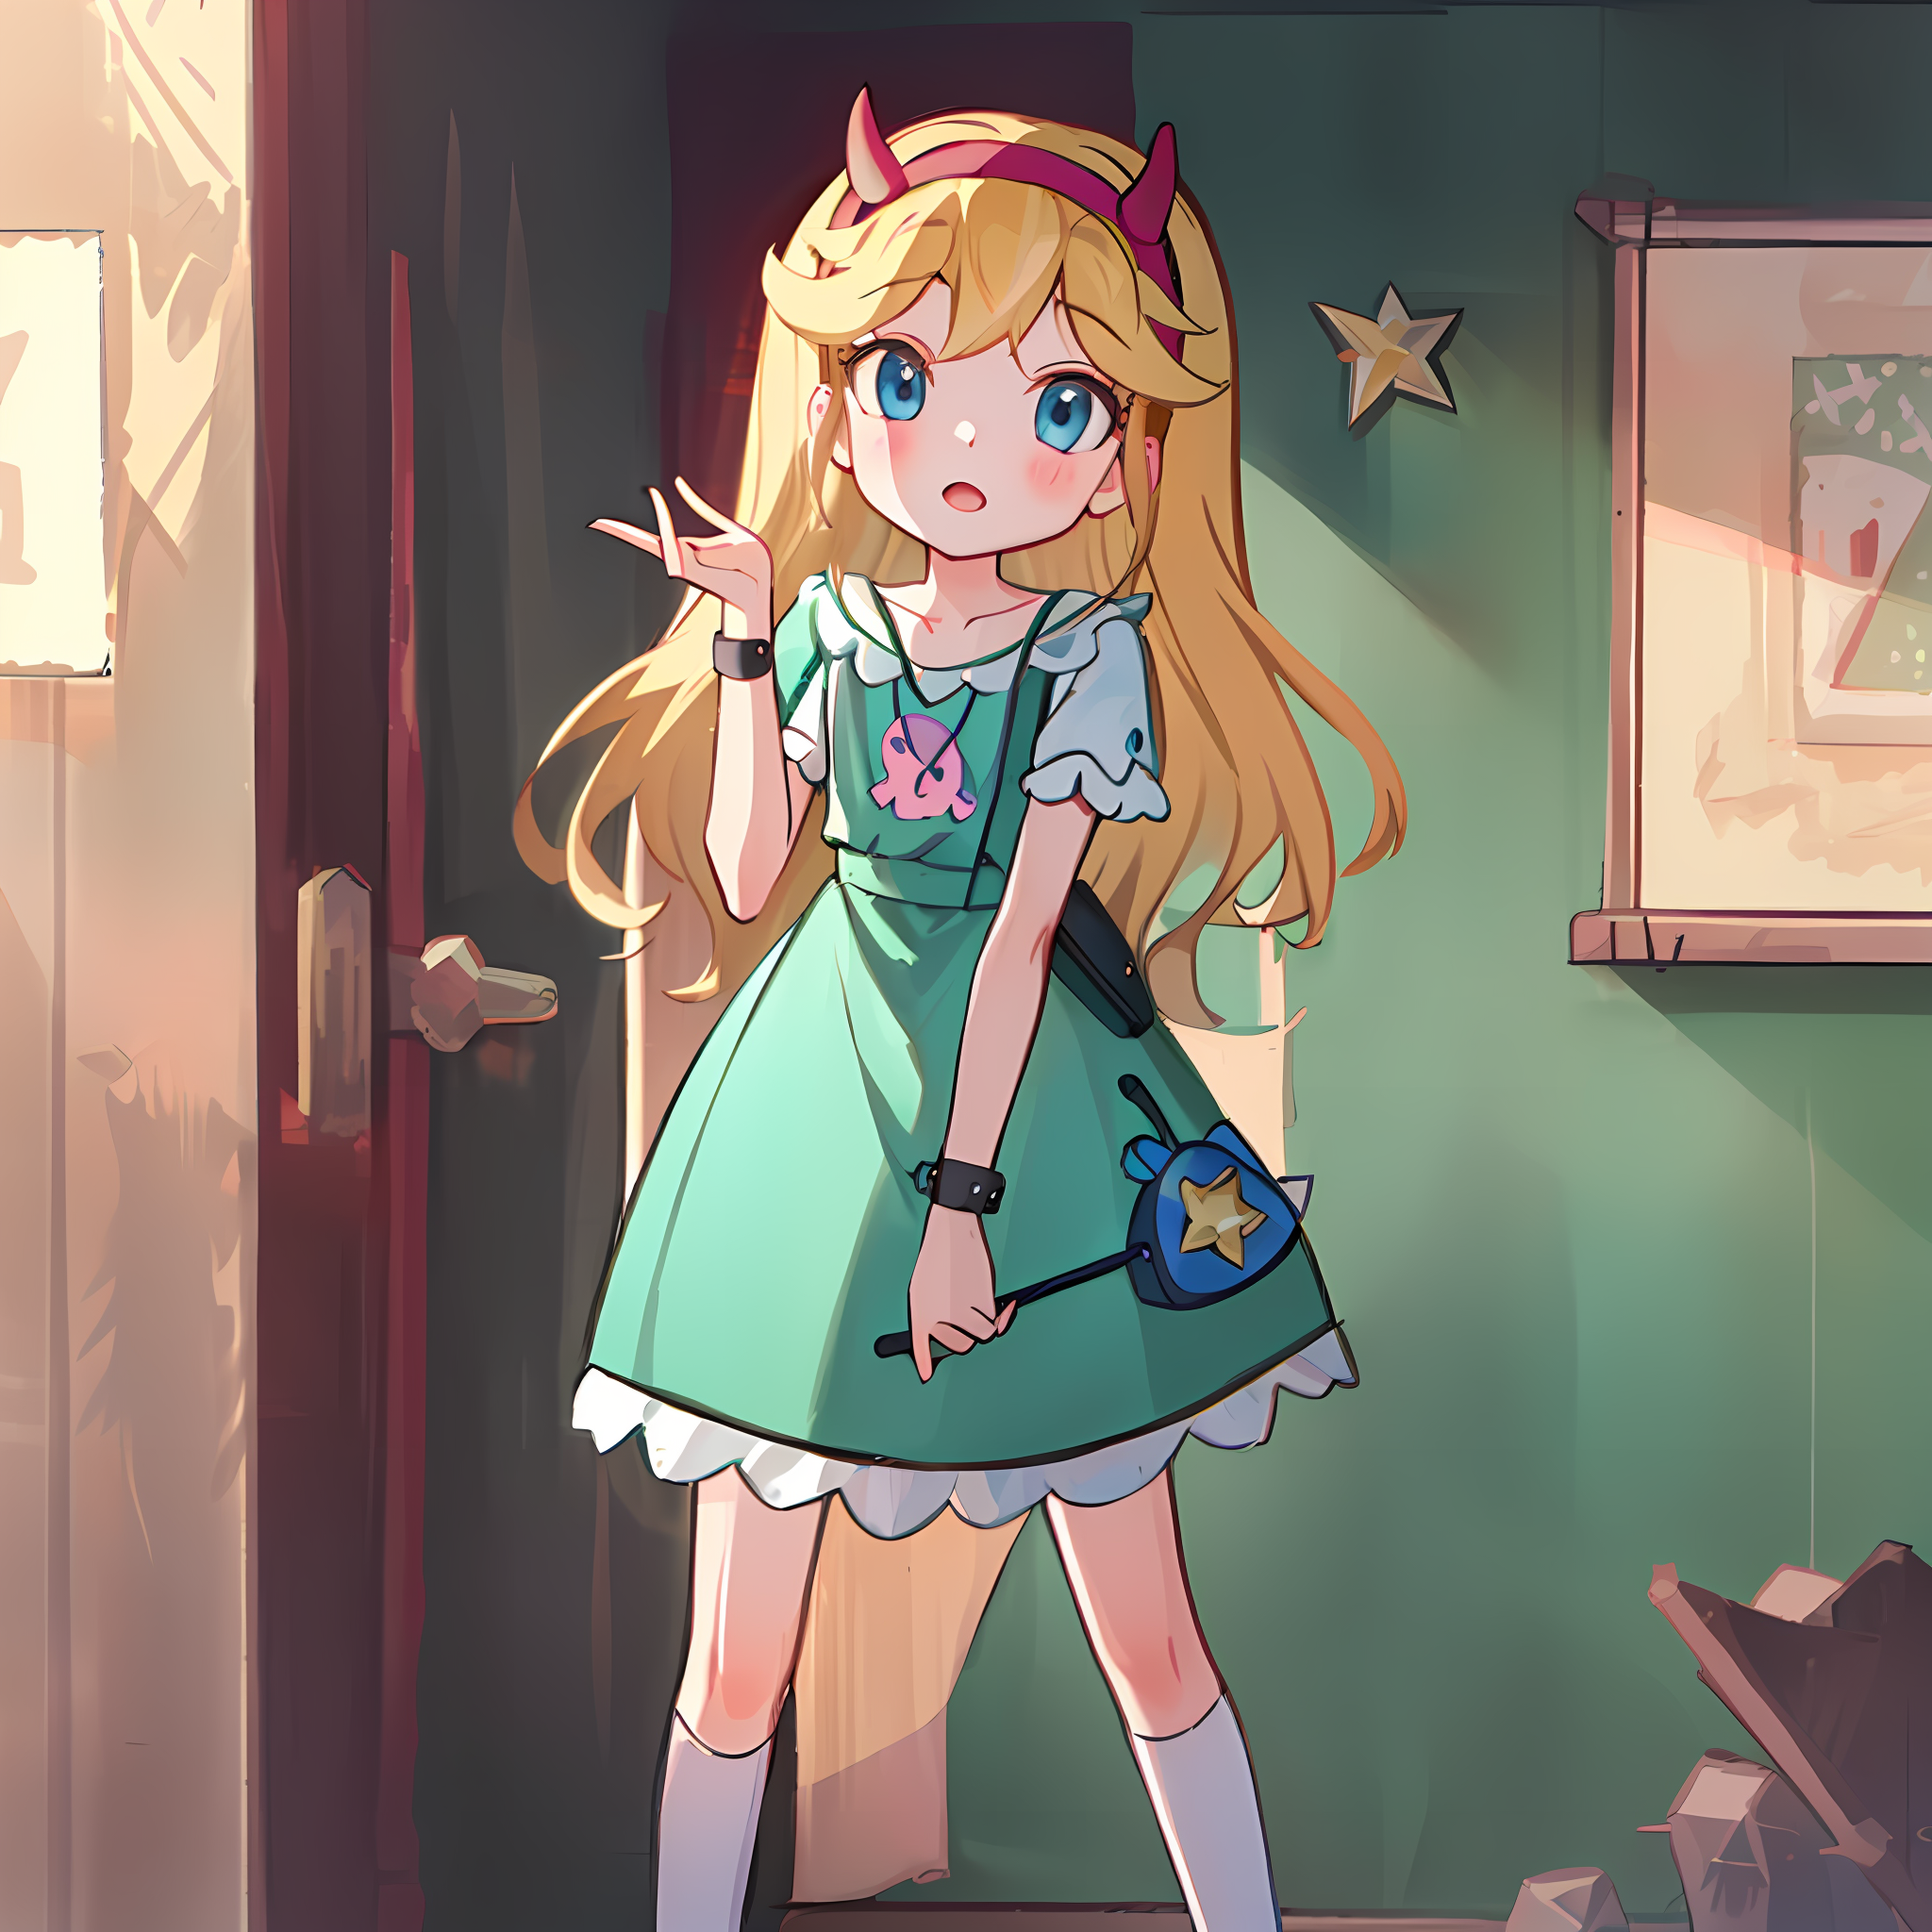 Star vs. the forces of evil - Star Butterfly image by Rech44